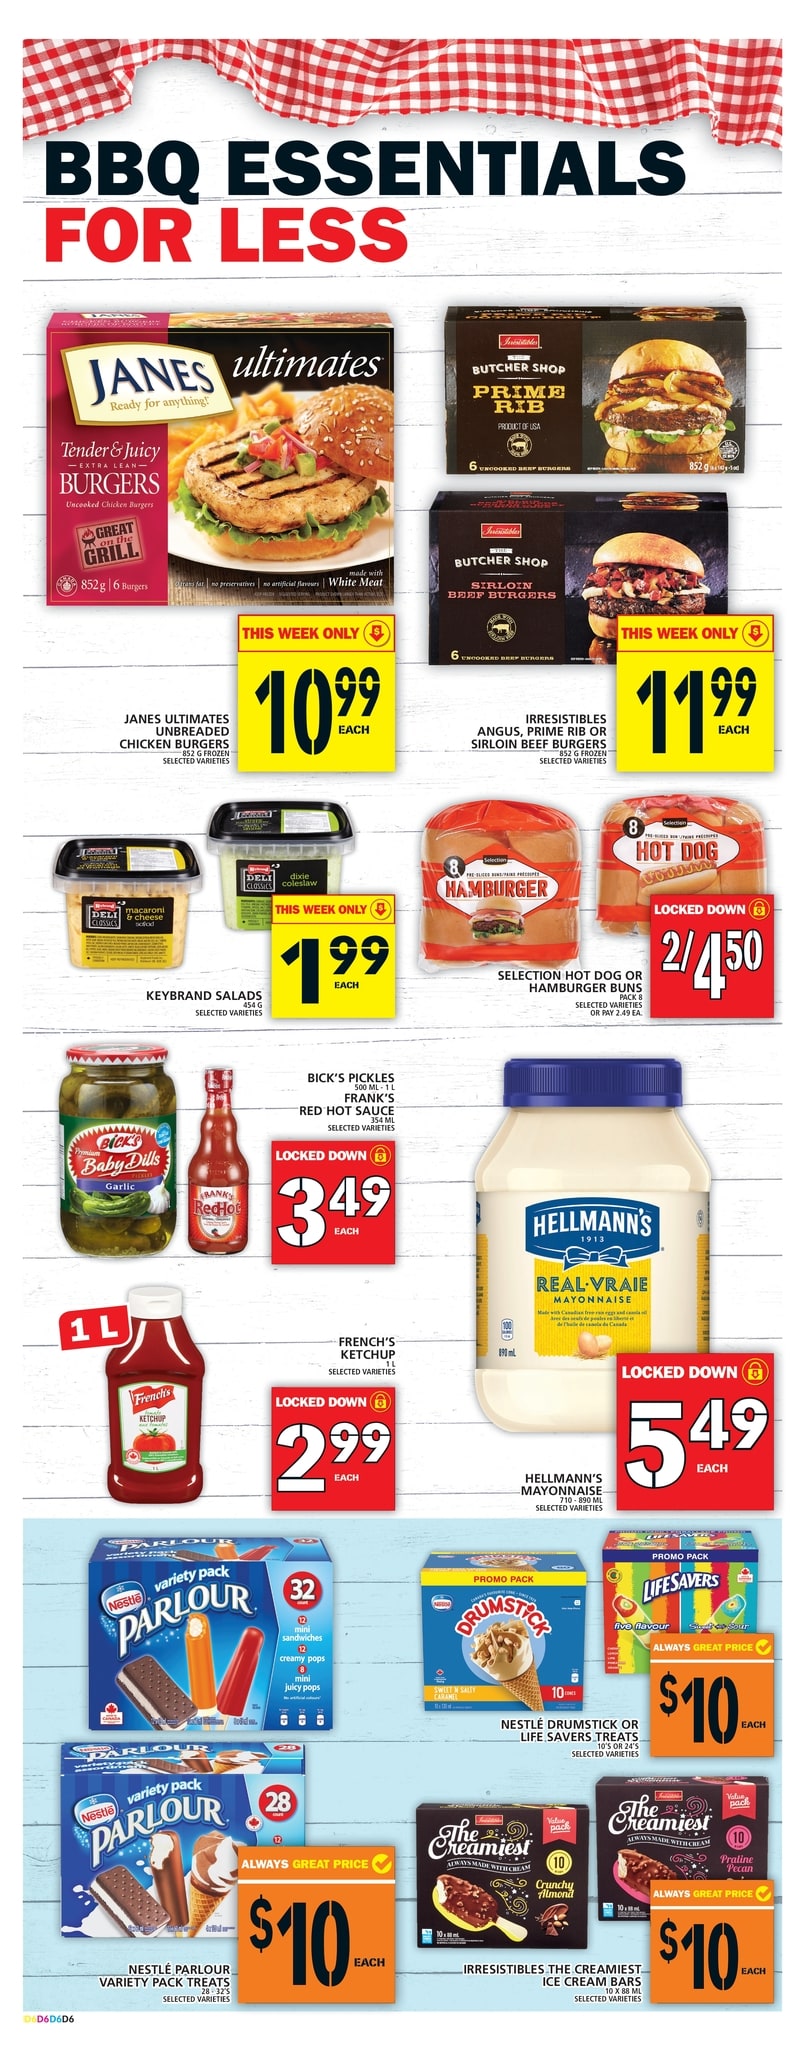 Food Basics - Weekly Flyer Specials - Page 9